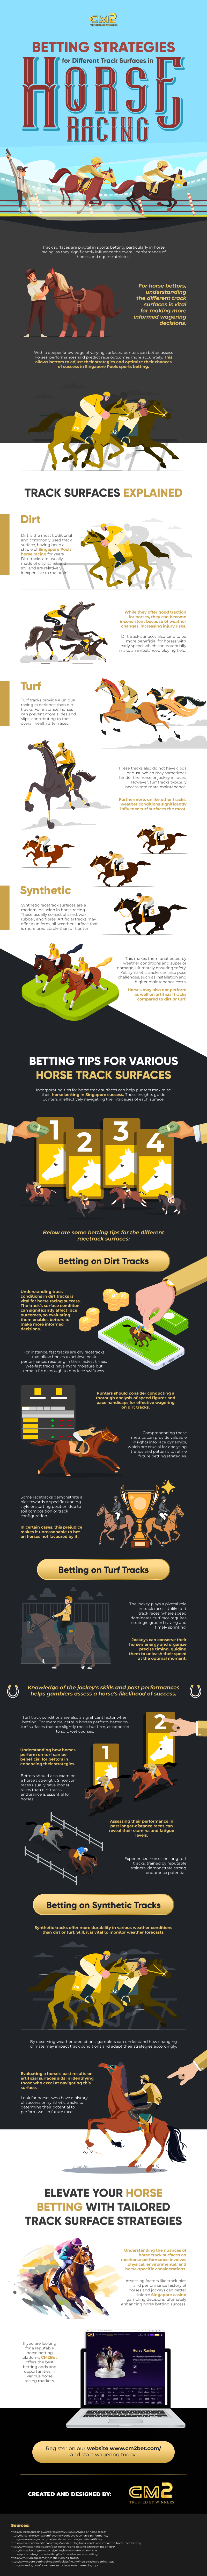 Betting Strategies for Different Track Surfaces in Horse Racing